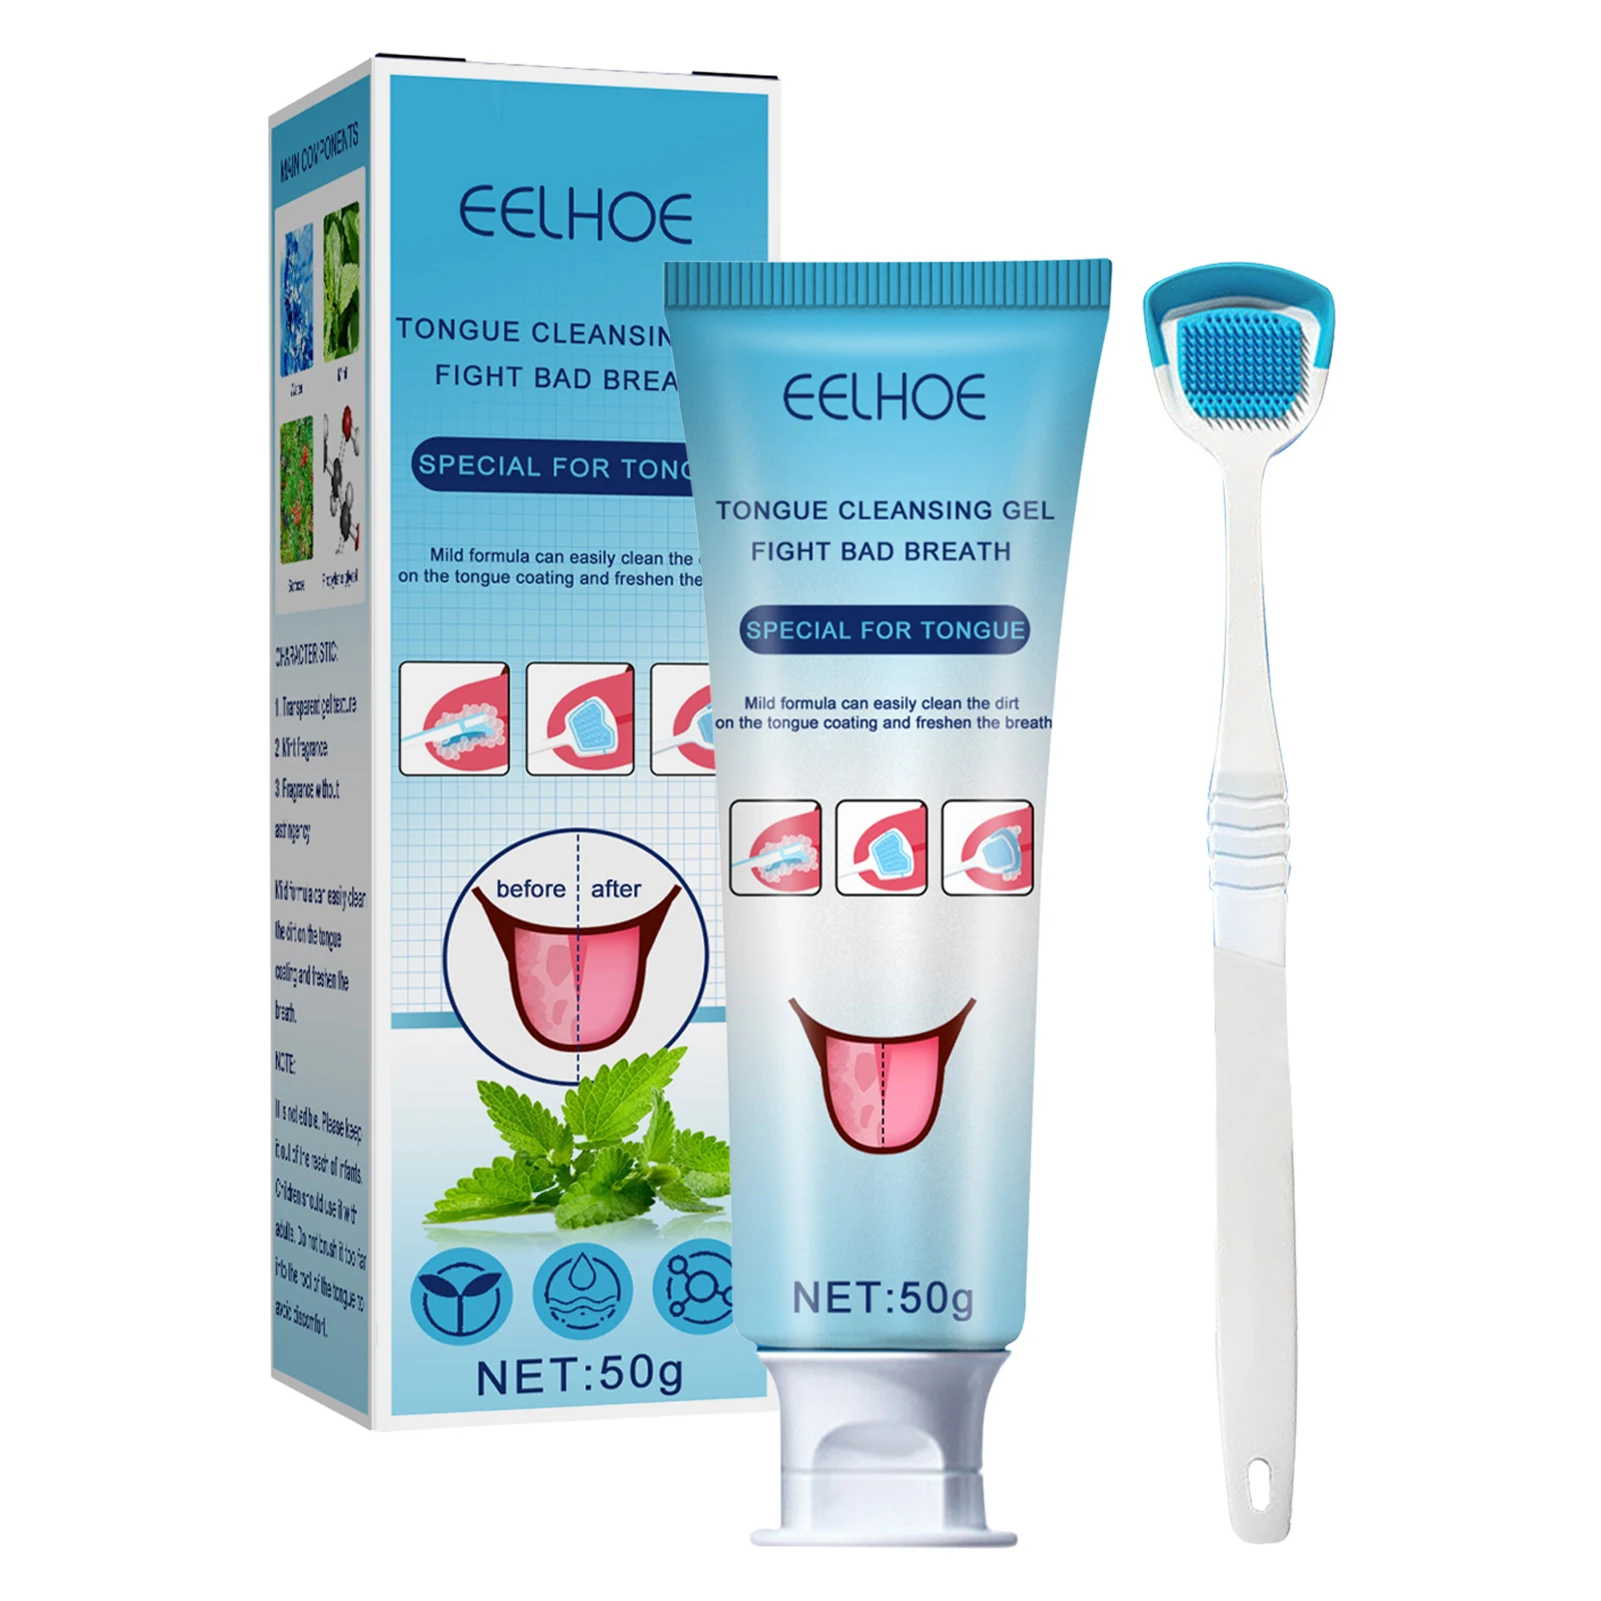 Tongue Cleaning Gel With Brush Reduce Bad Breath Healthy Oral Hygiene Brush Bad Breath For Adults & Kids Help Your Oral Hygiene